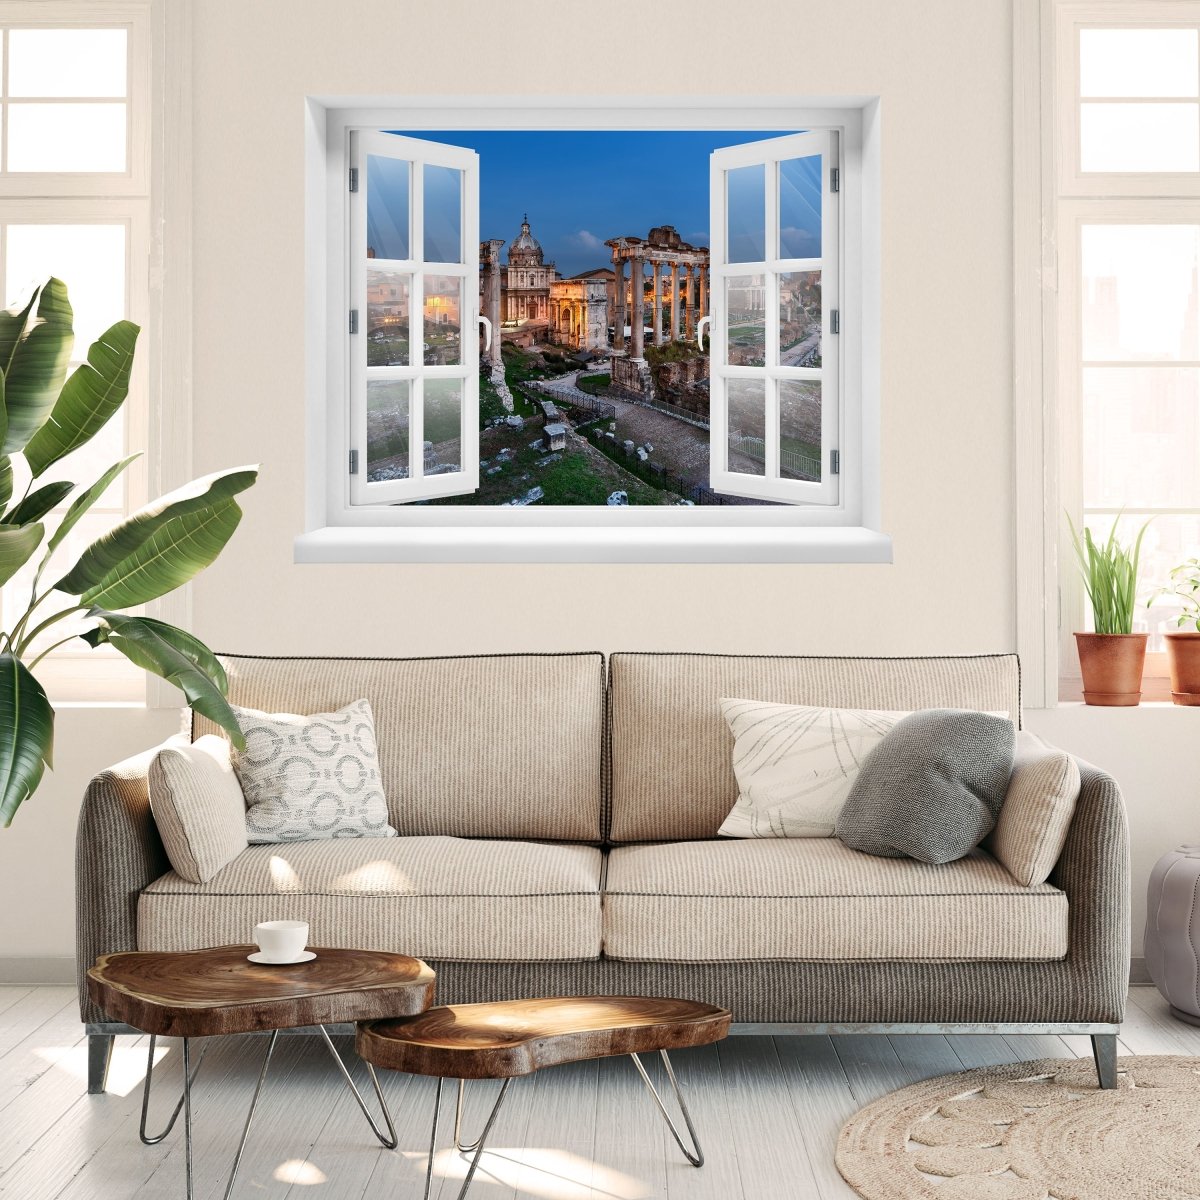 3D wall sticker panorama of the Roman Forum - Wall Decal M1056